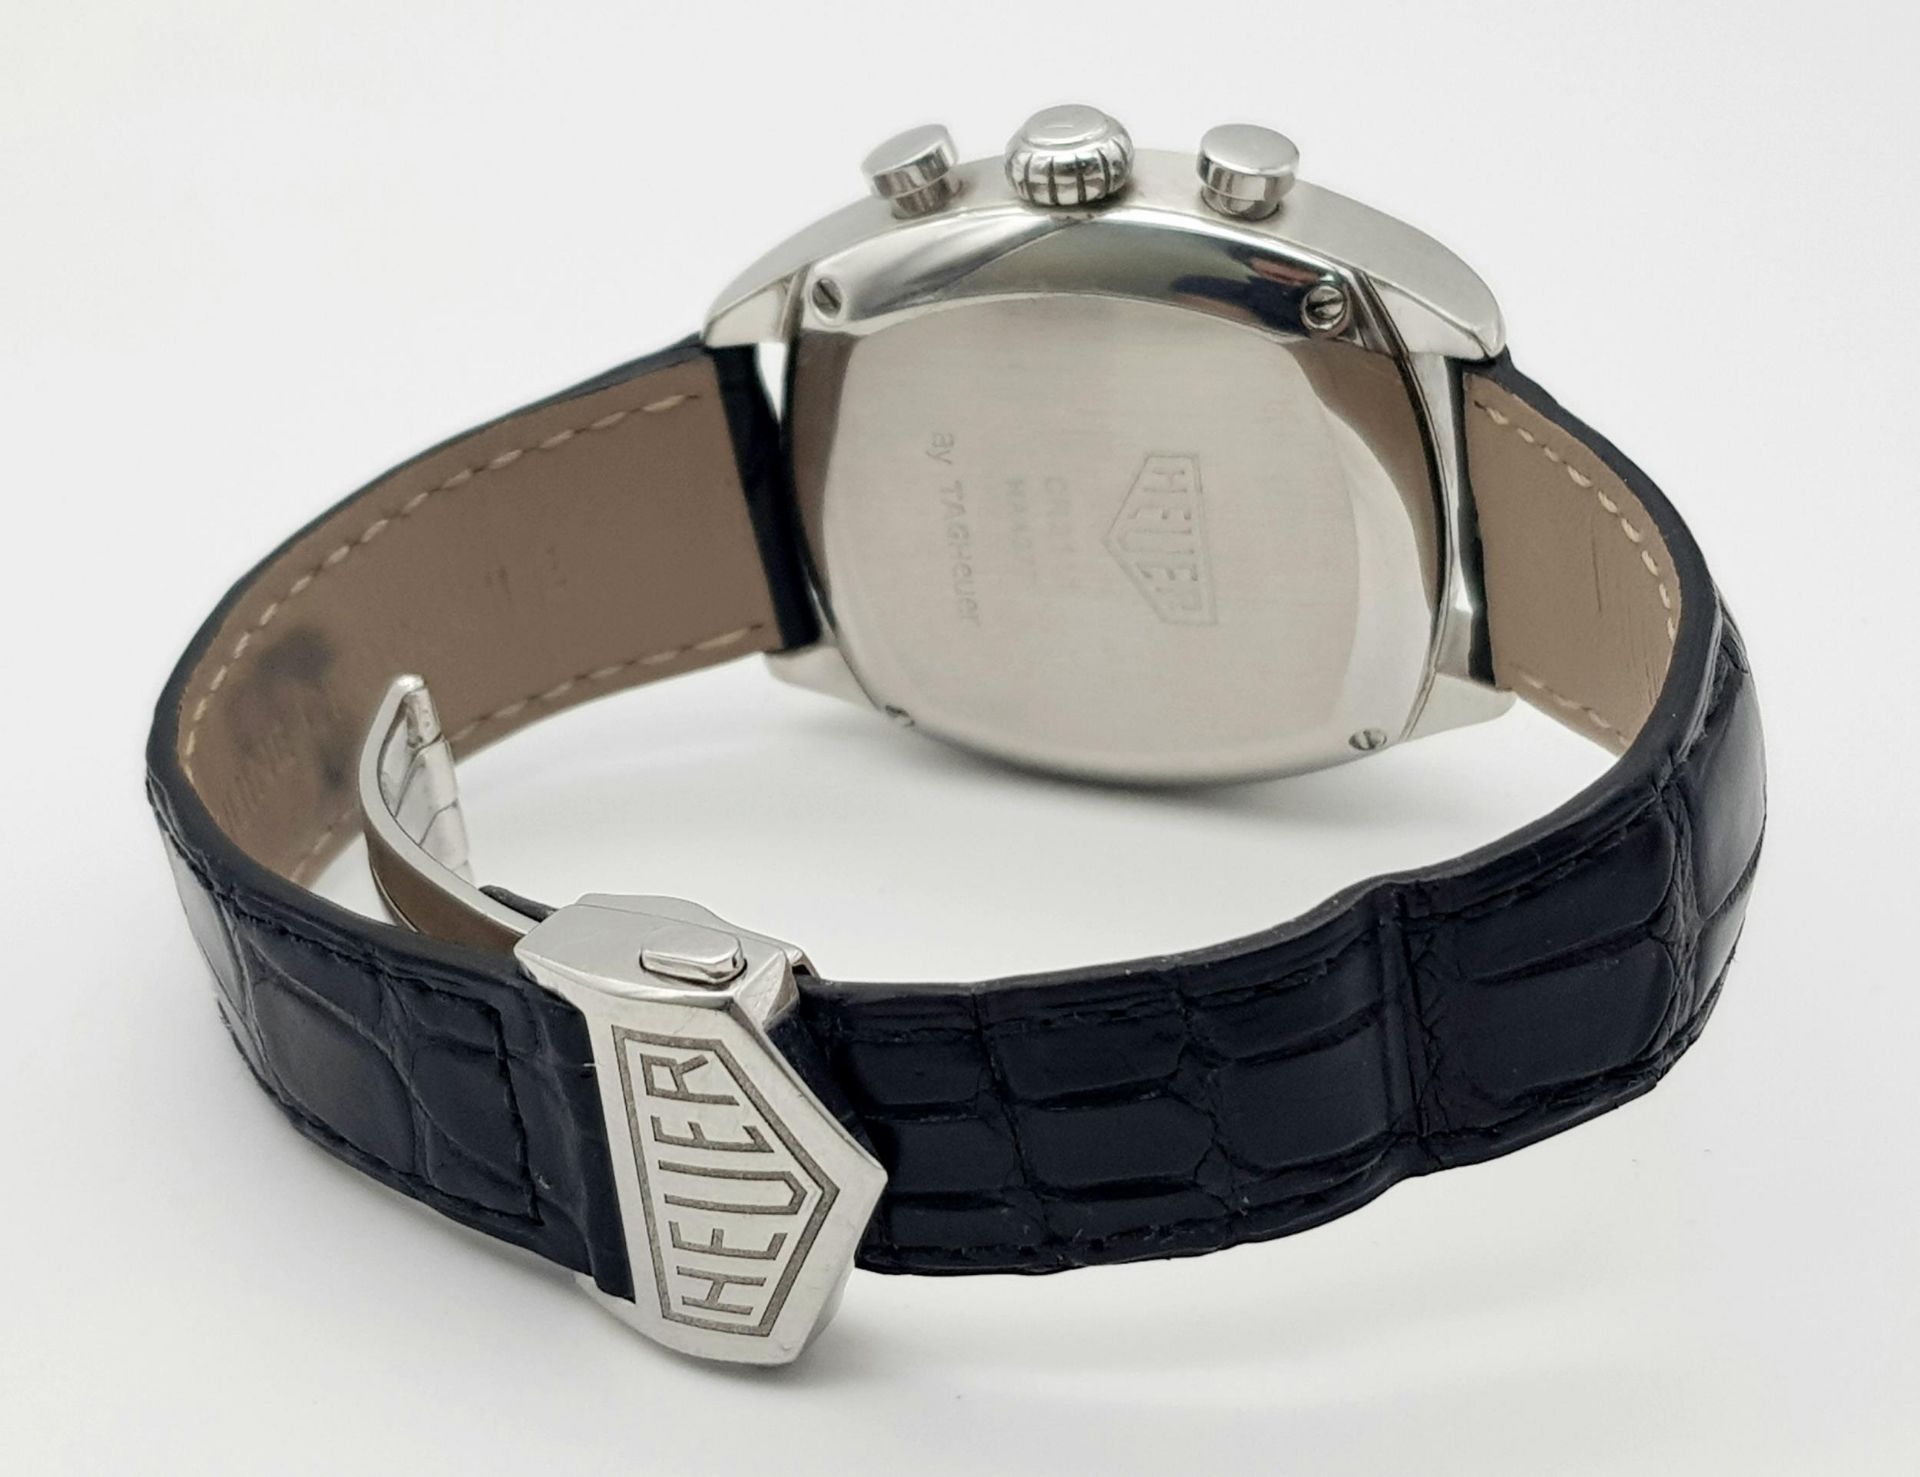 A Tag Heuer Monza Re-Edition Automatic Chronograph Watch. Model CR2111. Black Croc Leather Tag - Image 3 of 7